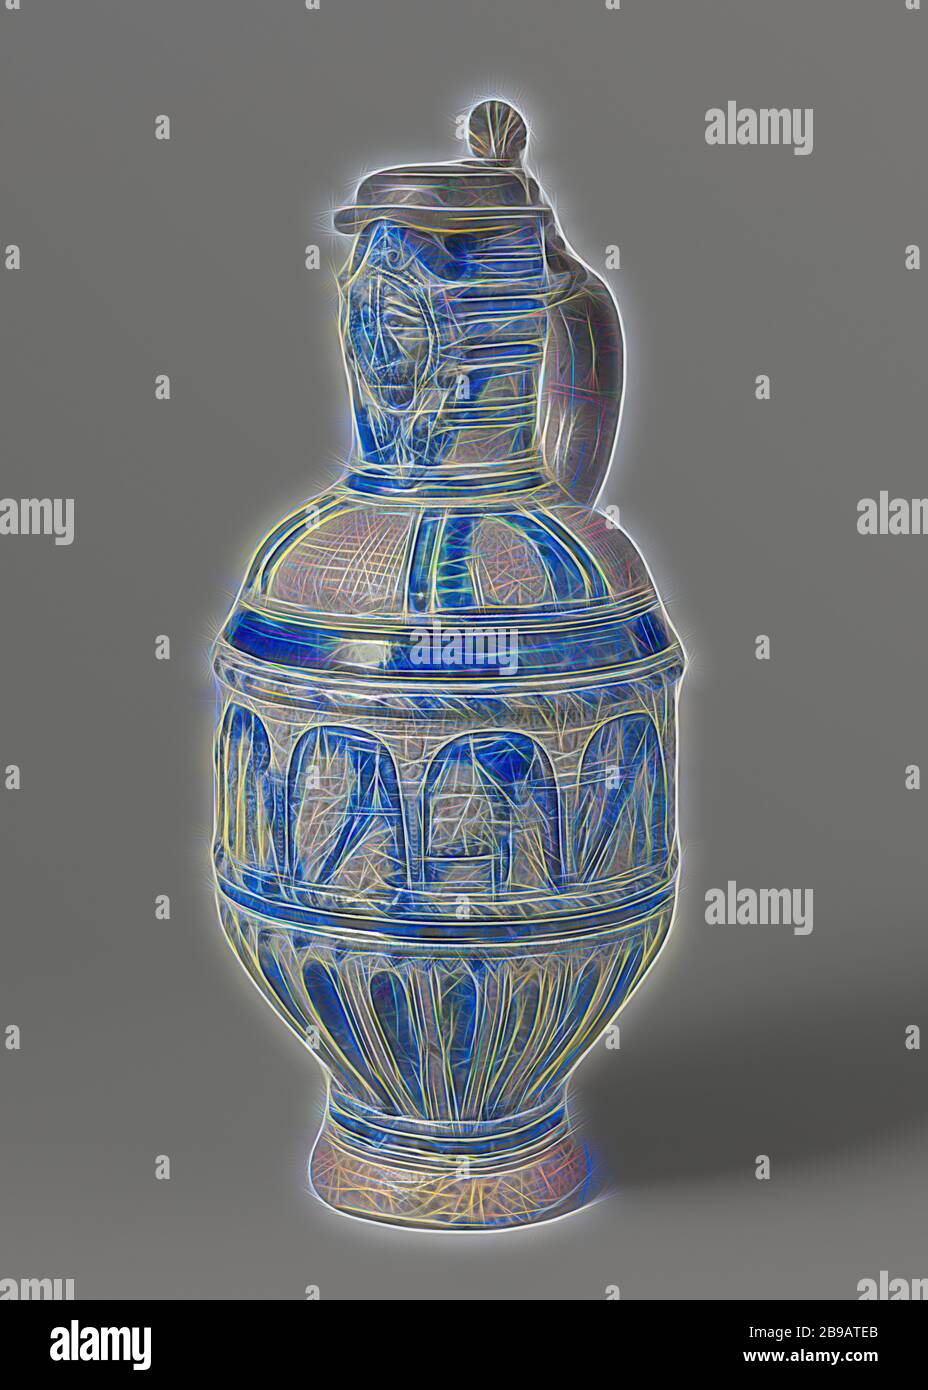 Jug with scenes from the life of Judith and Holofernes, Can of stoneware on high feet with a cylindrical body, round shoulder and narrow neck with pinched spout. The C-shaped ear is attached to the neck and shoulder. Profiles on the neck, abdomen and foot. Partially covered with cobalt blue. On the cylindrical part of the abdomen nine representations, of which the first three are double, from the life of Judith and Holofernes. In addition, a poorly readable inscription 'D: BVM.GBV TYTR: D: PK: DI: STAT: INVESTMENT: D: SCHLAF: DRVN: DEN HEAD: D: HEAD: HIR: AVS: D: AVS: D: BVM: GBV'. The lower p Stock Photo